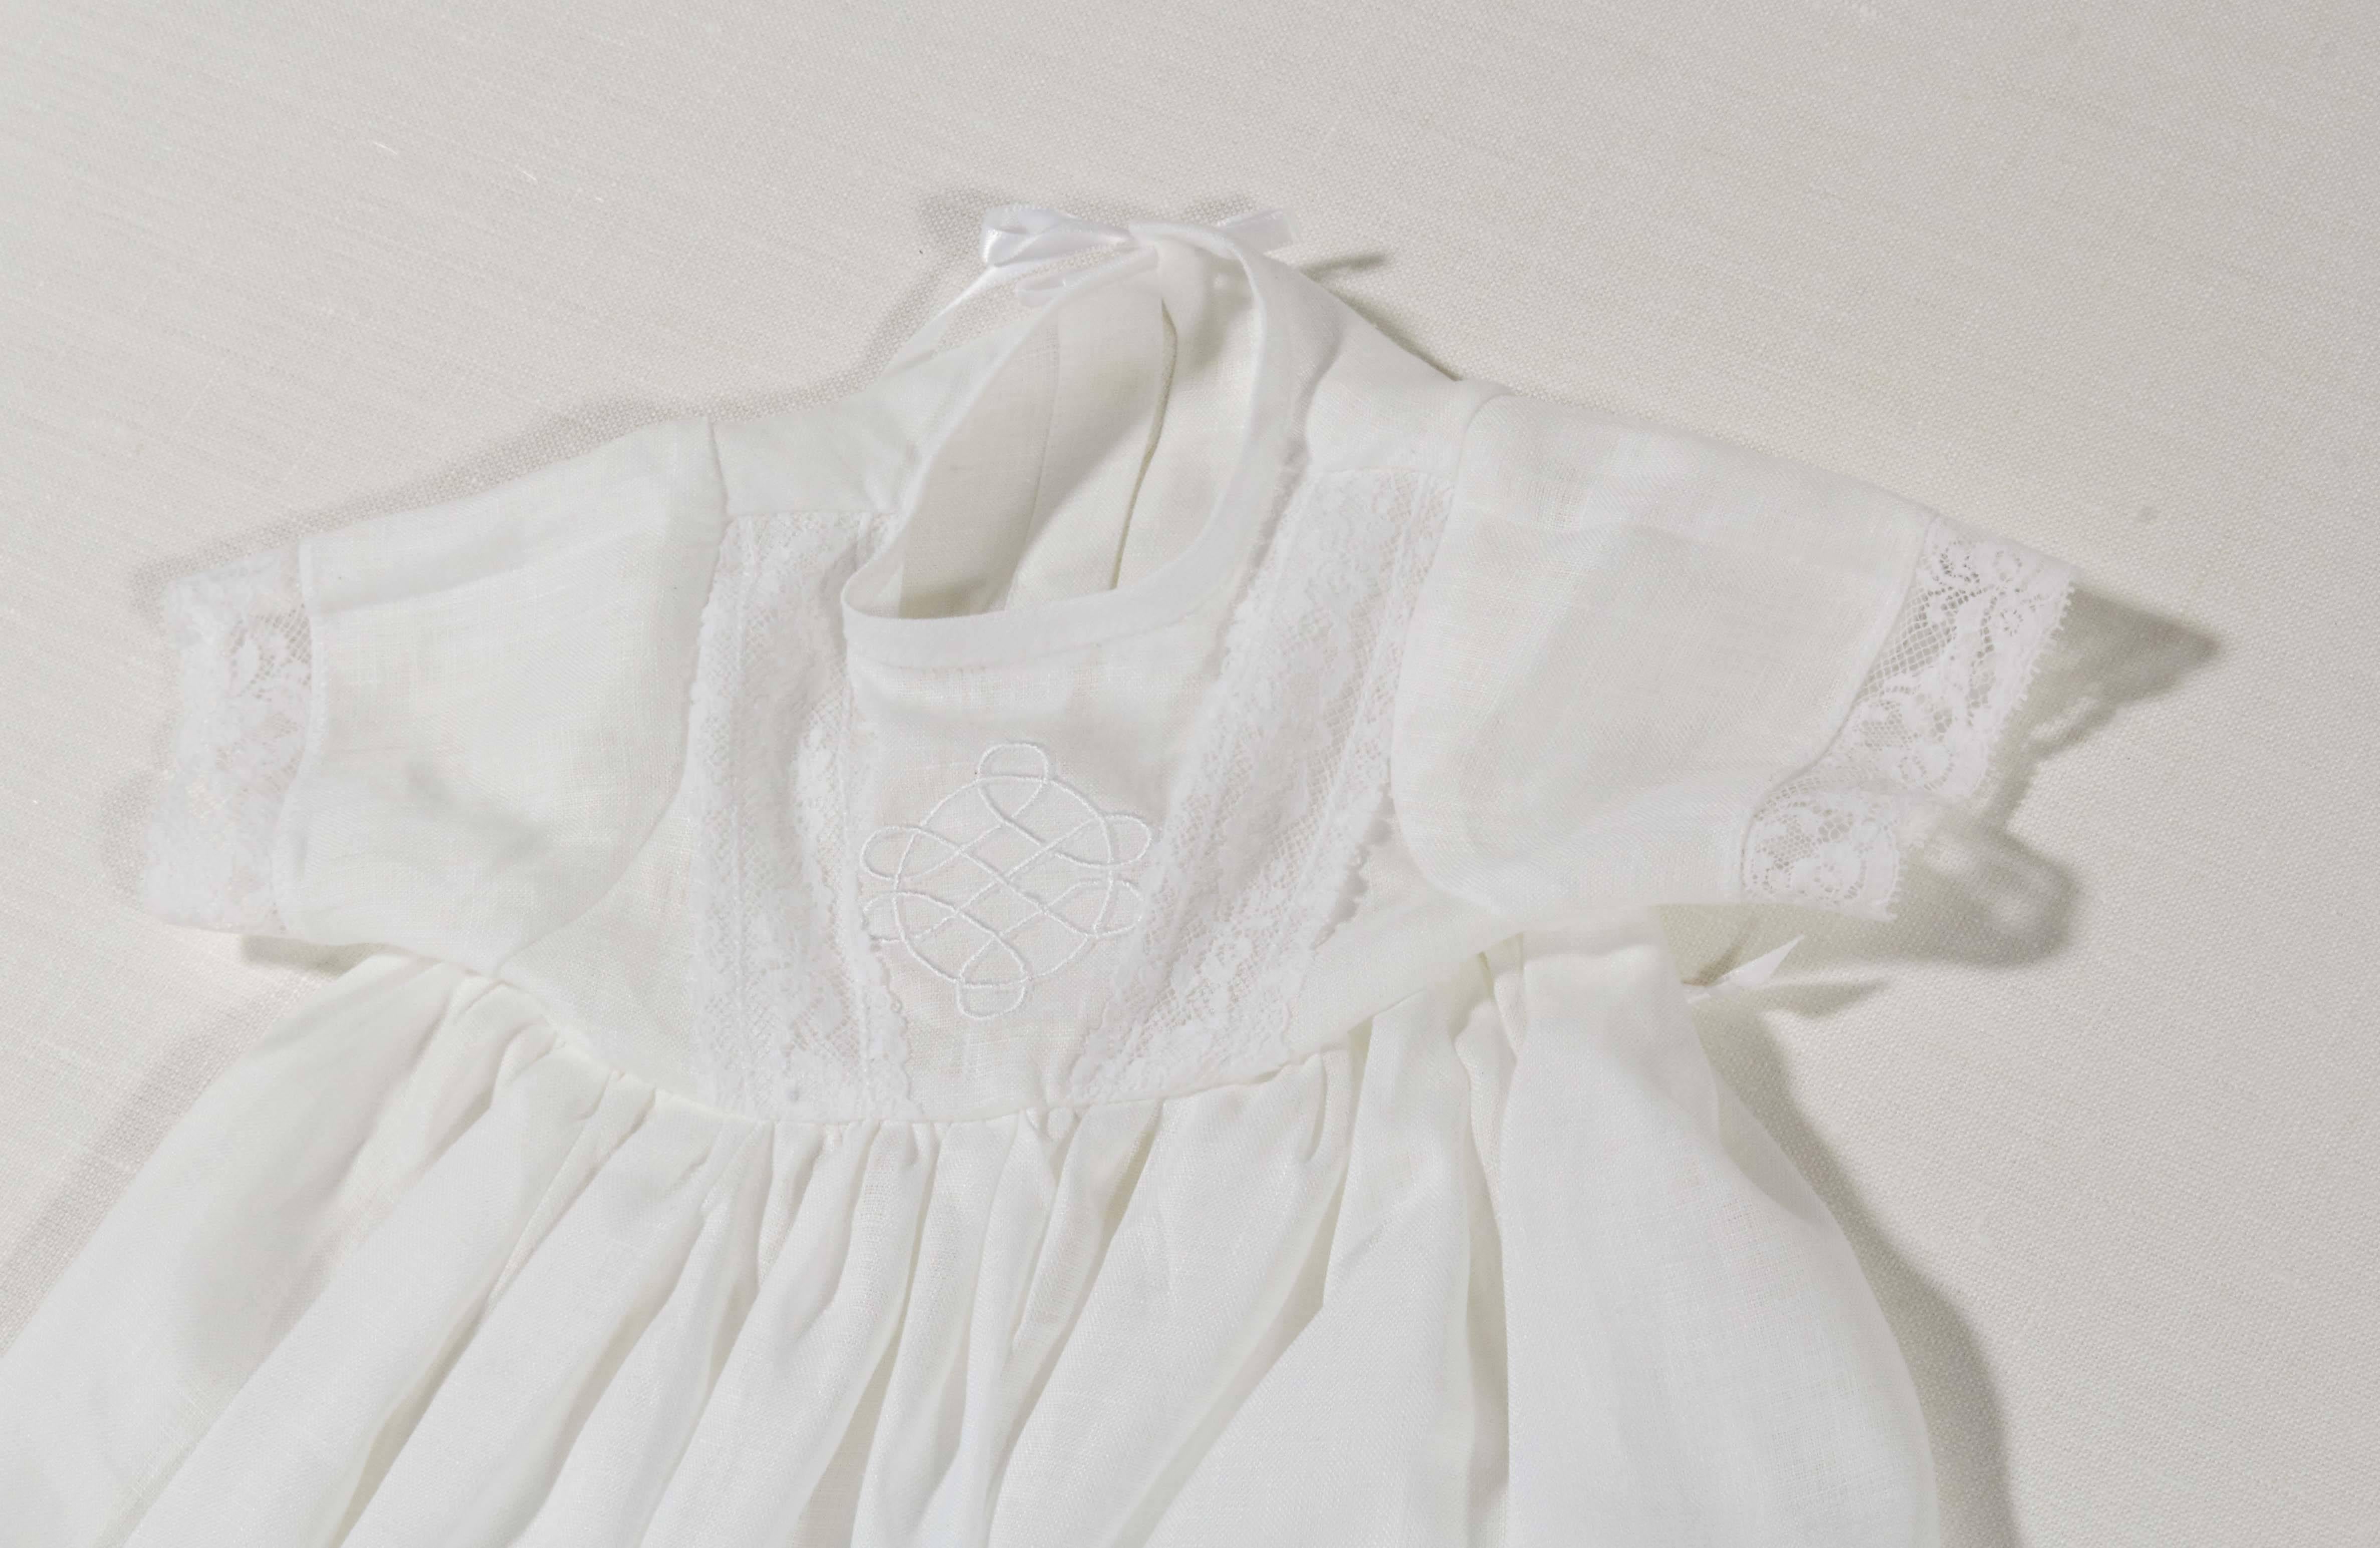 Framed Child's Christening Gown In Excellent Condition For Sale In New York, NY